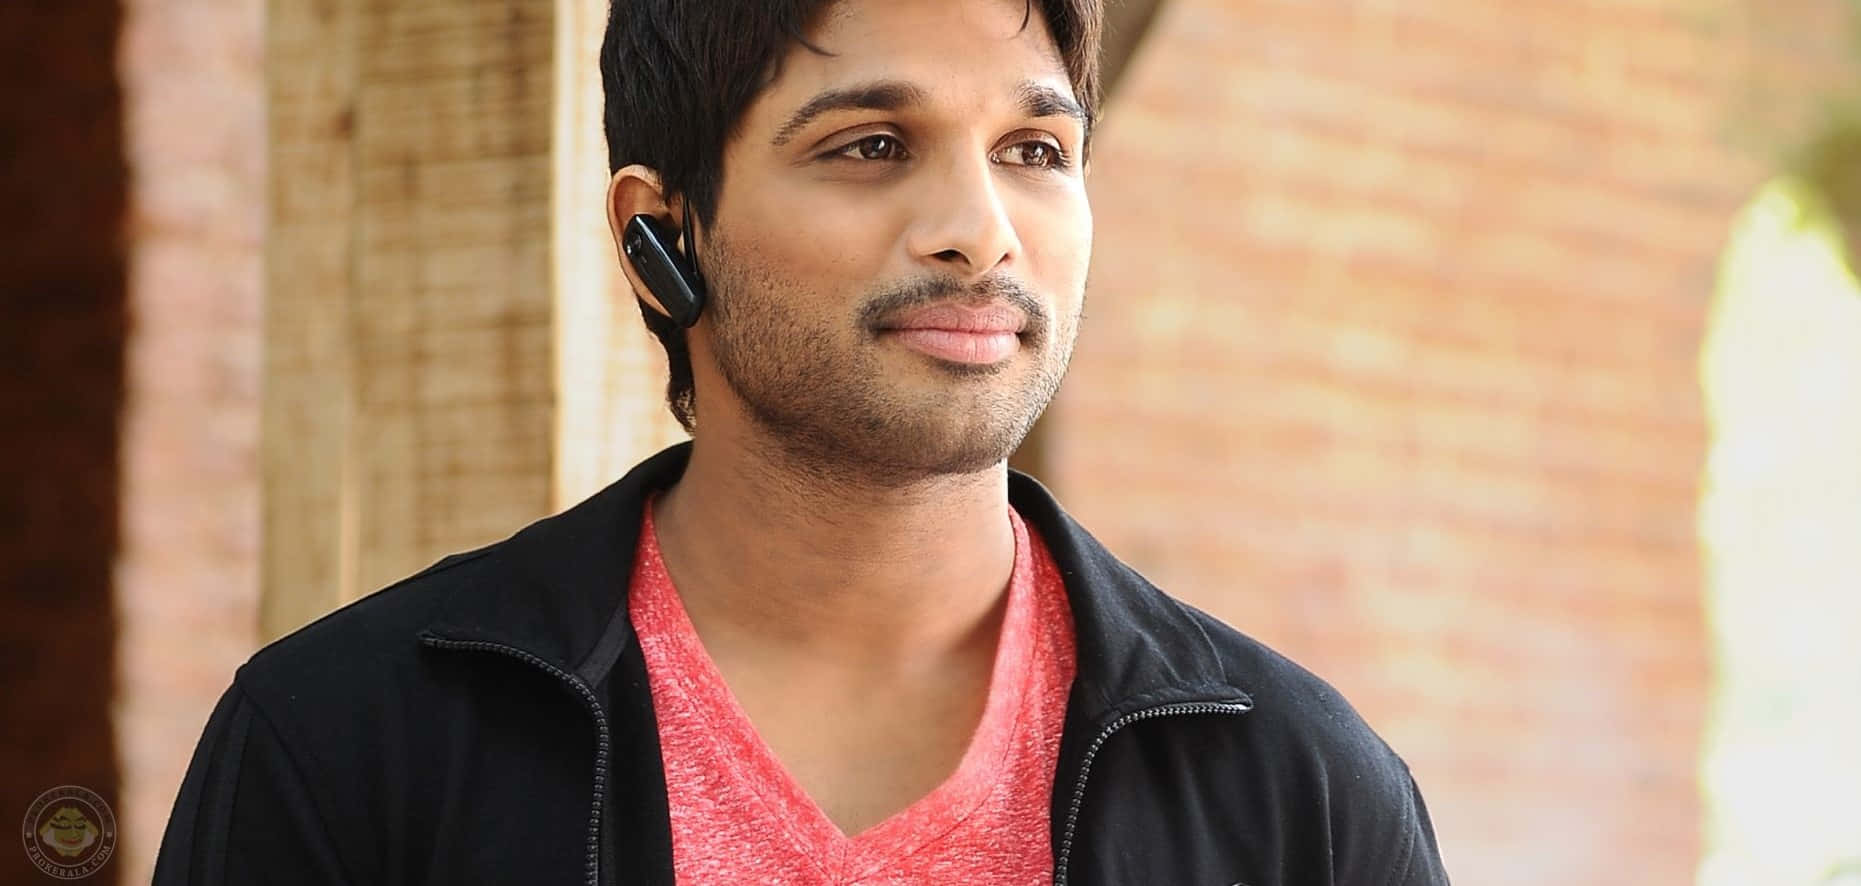 A Man Wearing A Black Jacket And Earphones